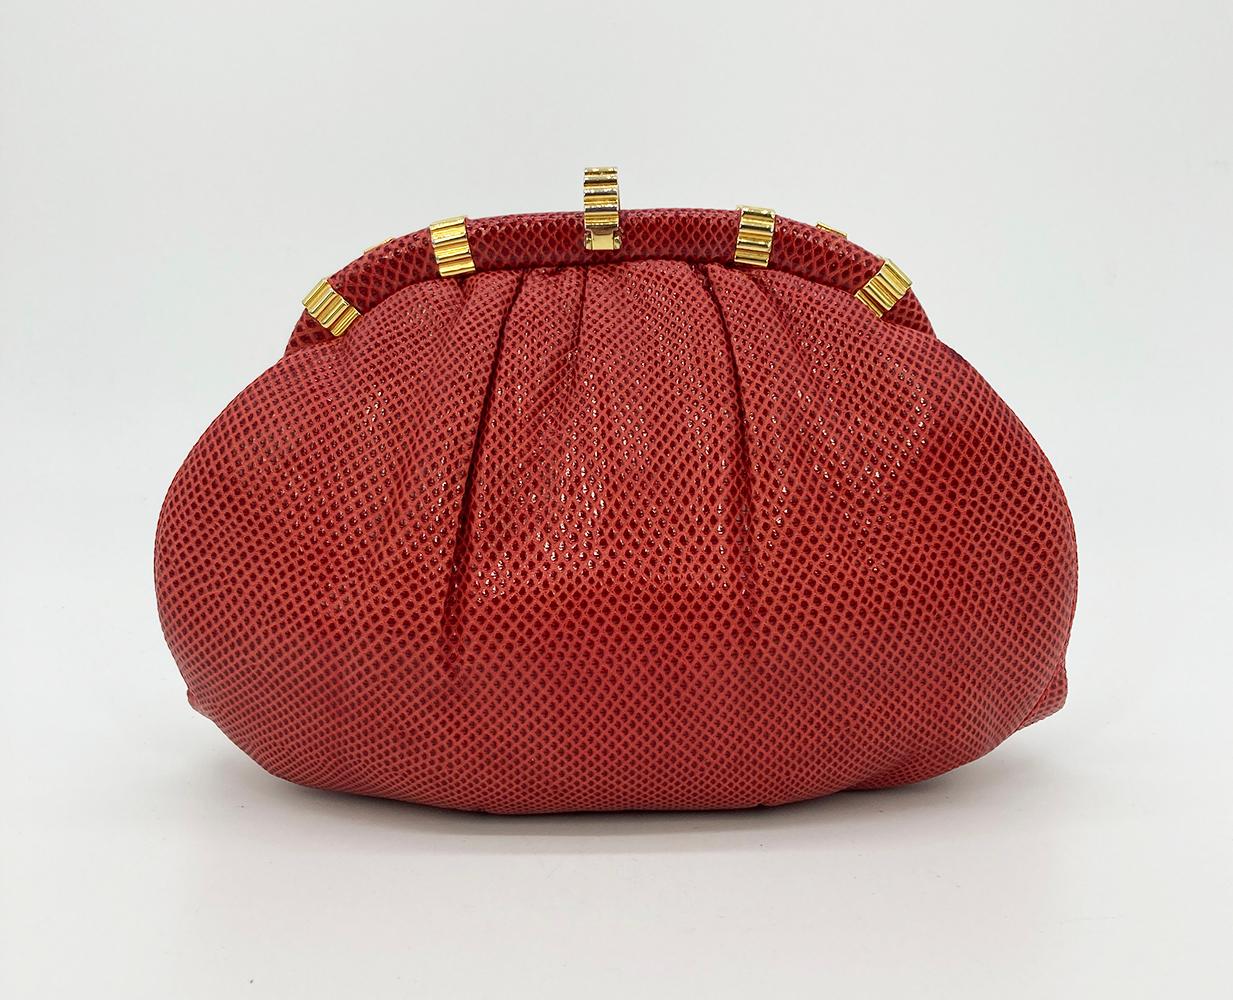 Judith Leiber Red Lizard Clutch In Good Condition For Sale In Philadelphia, PA